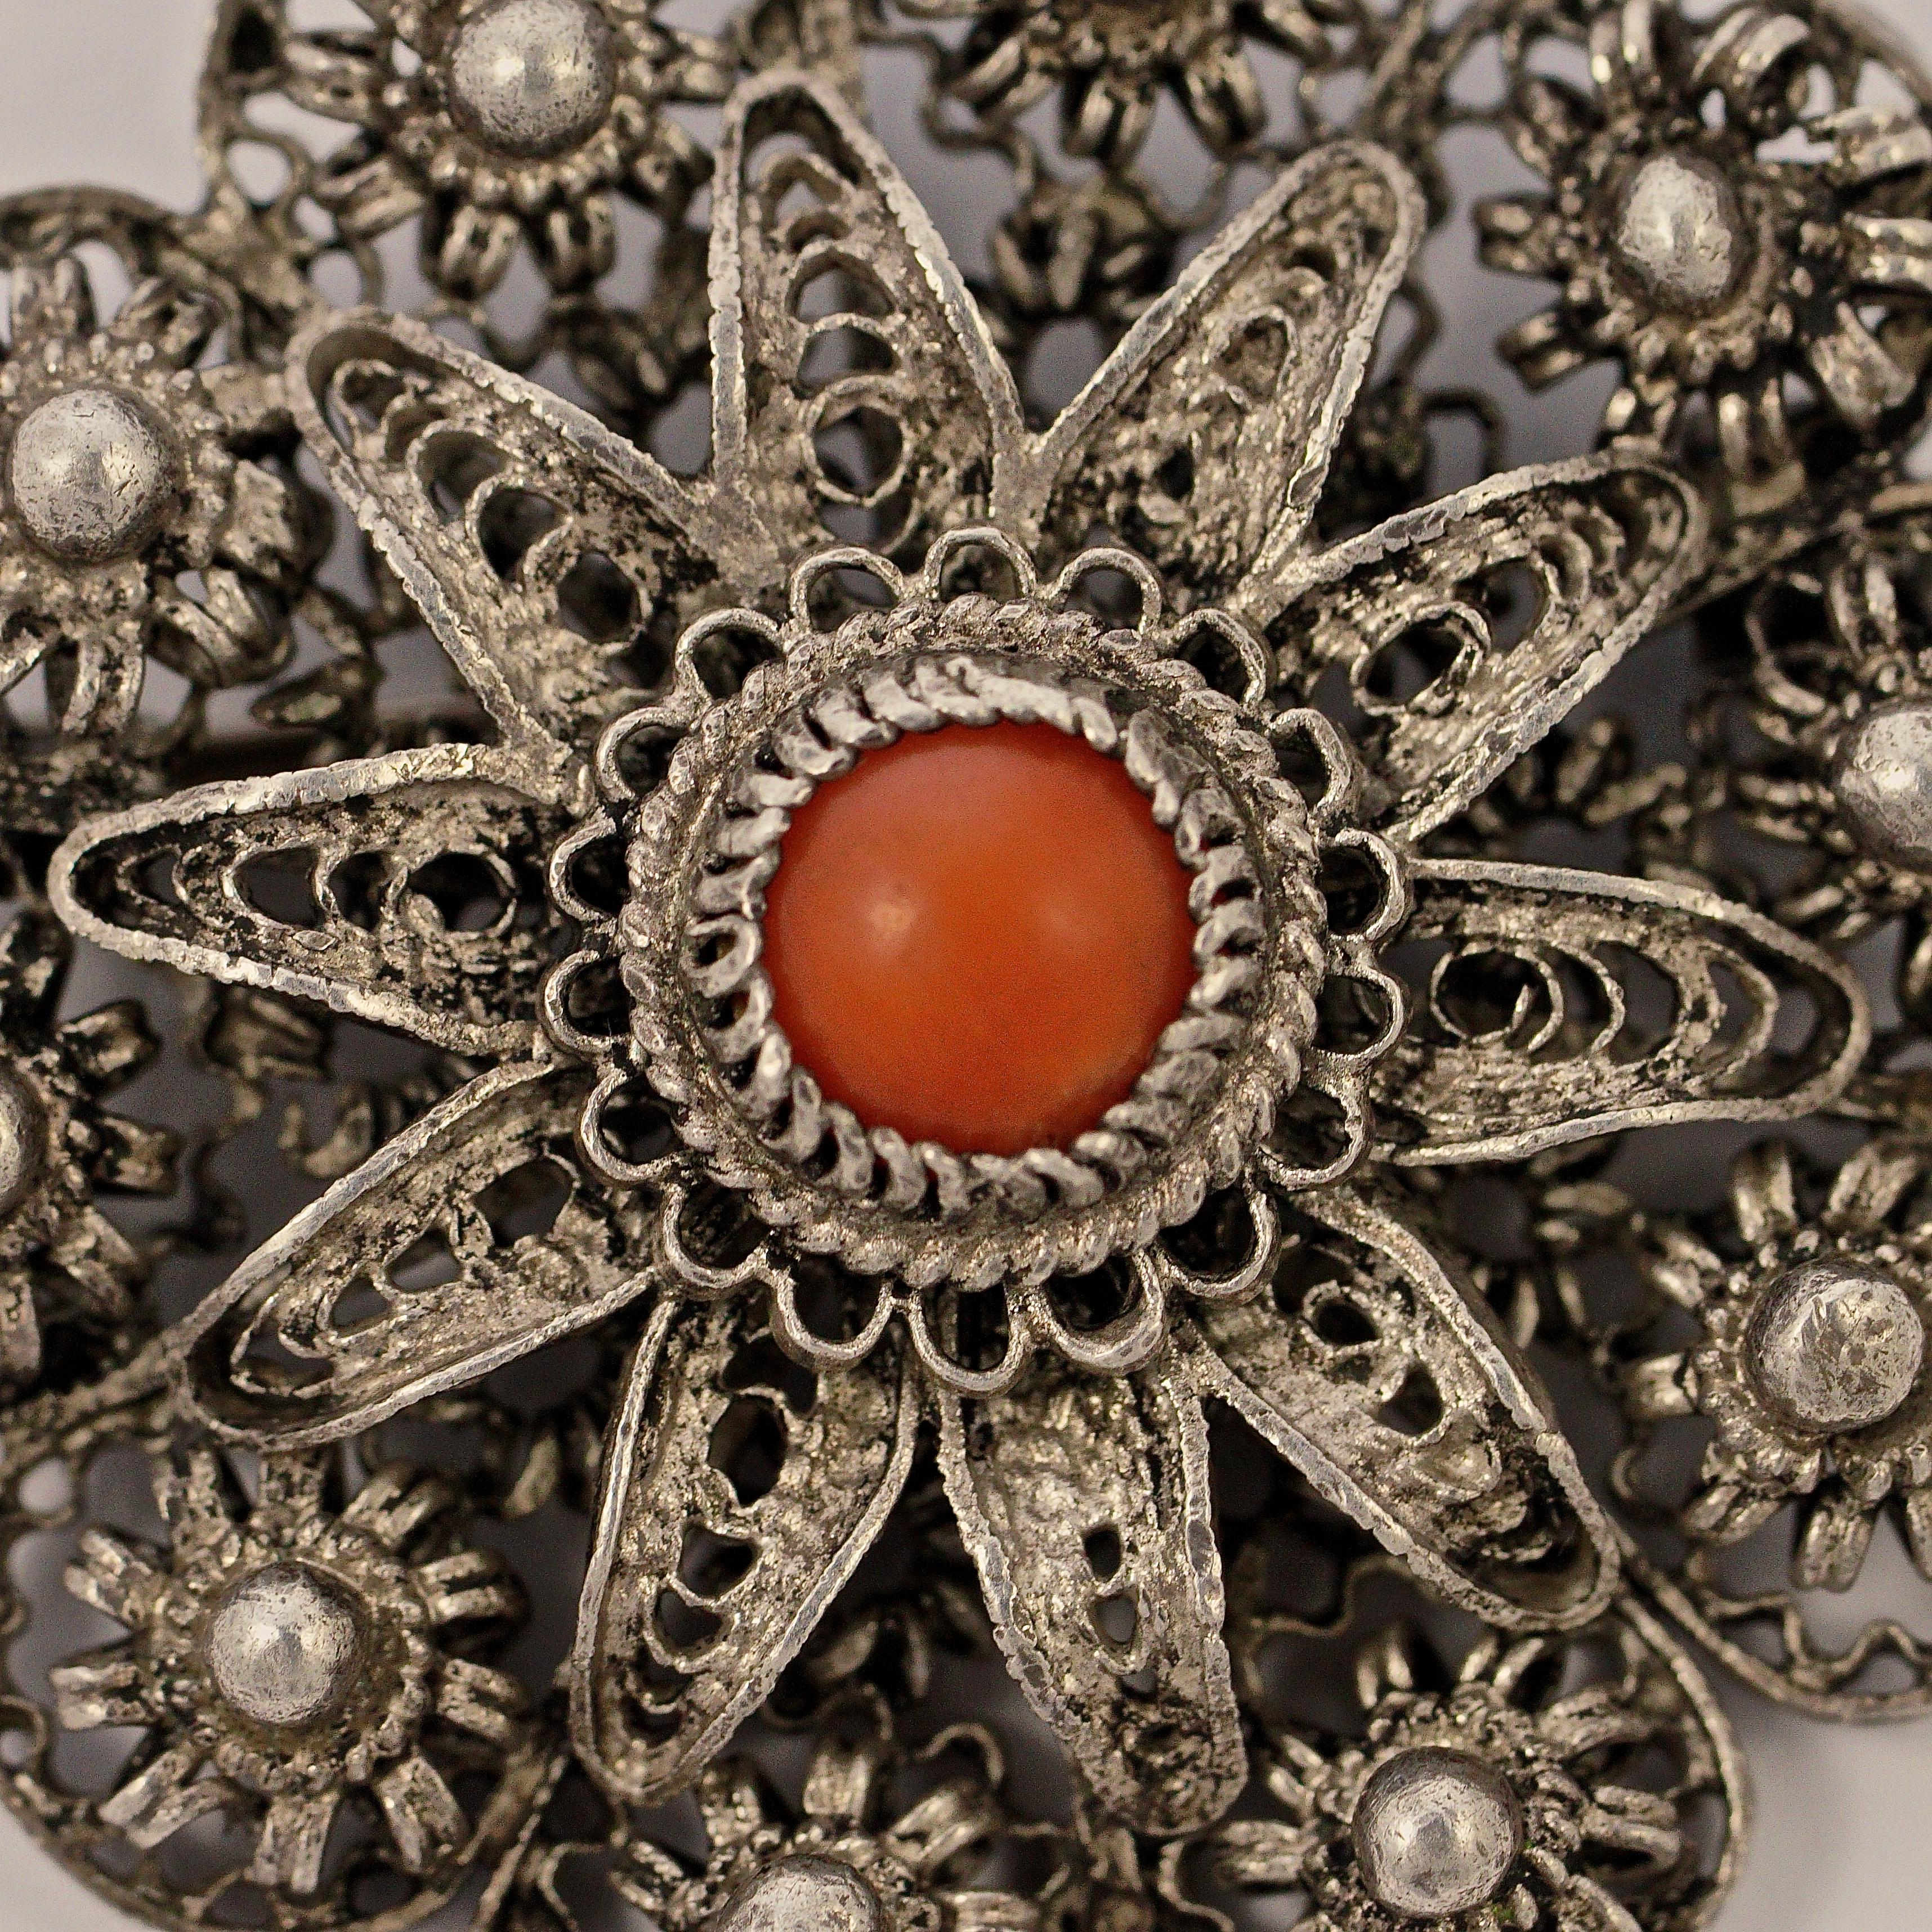 
Exquisite Chinese export round silver and coral fine filigree cannetille brooch, it has a lovely vintage patina. Measuring diameter 3.5cm / 1.37 inches. There are no marks, the brooch tests for silver. The pin is loose, but the clasp works